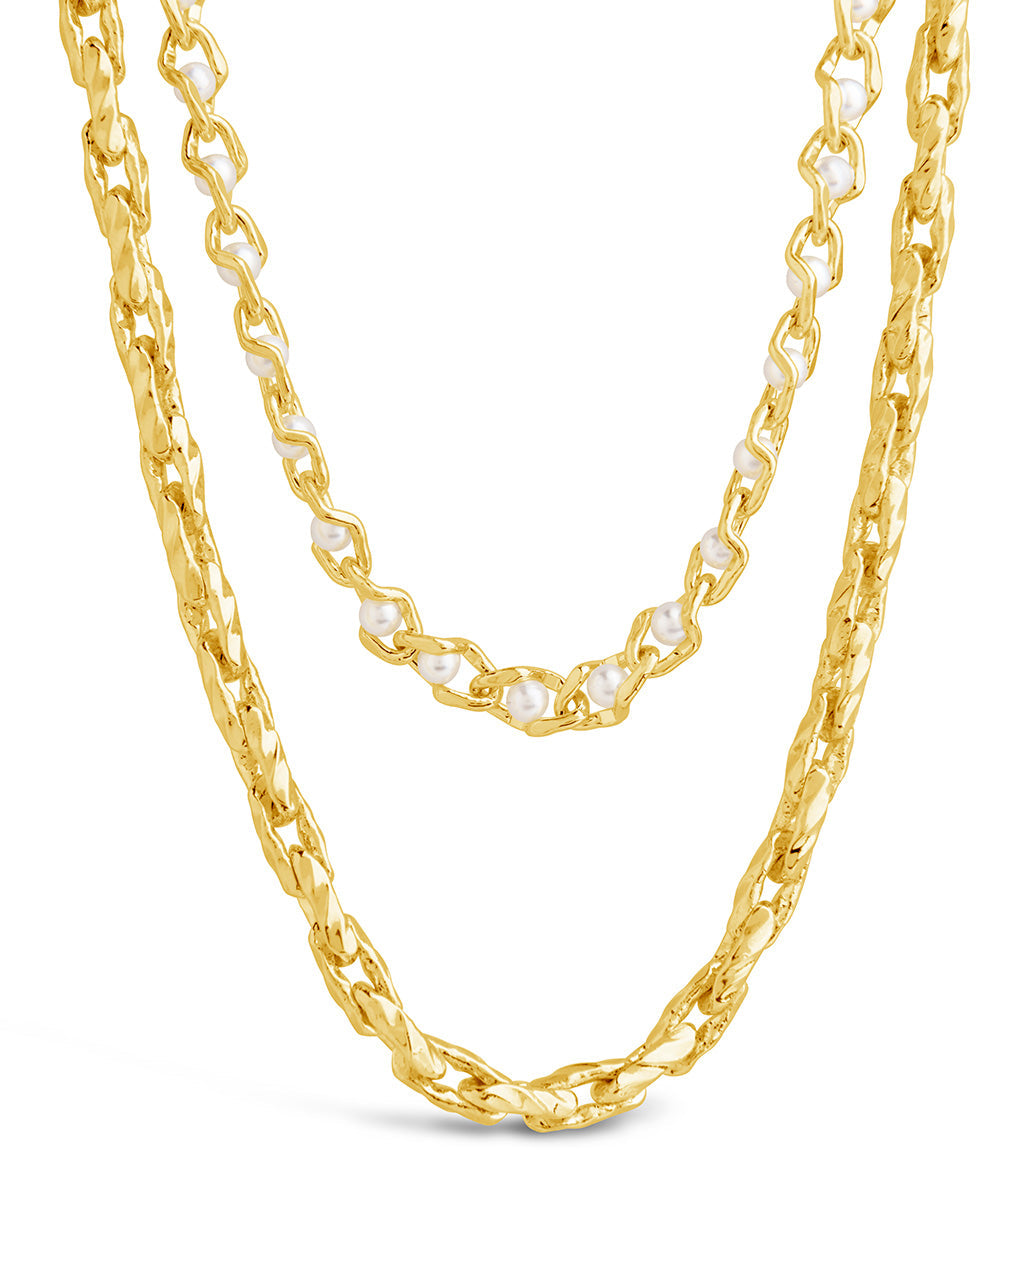 Amedea Layered Necklace Necklace Sterling Forever Gold 